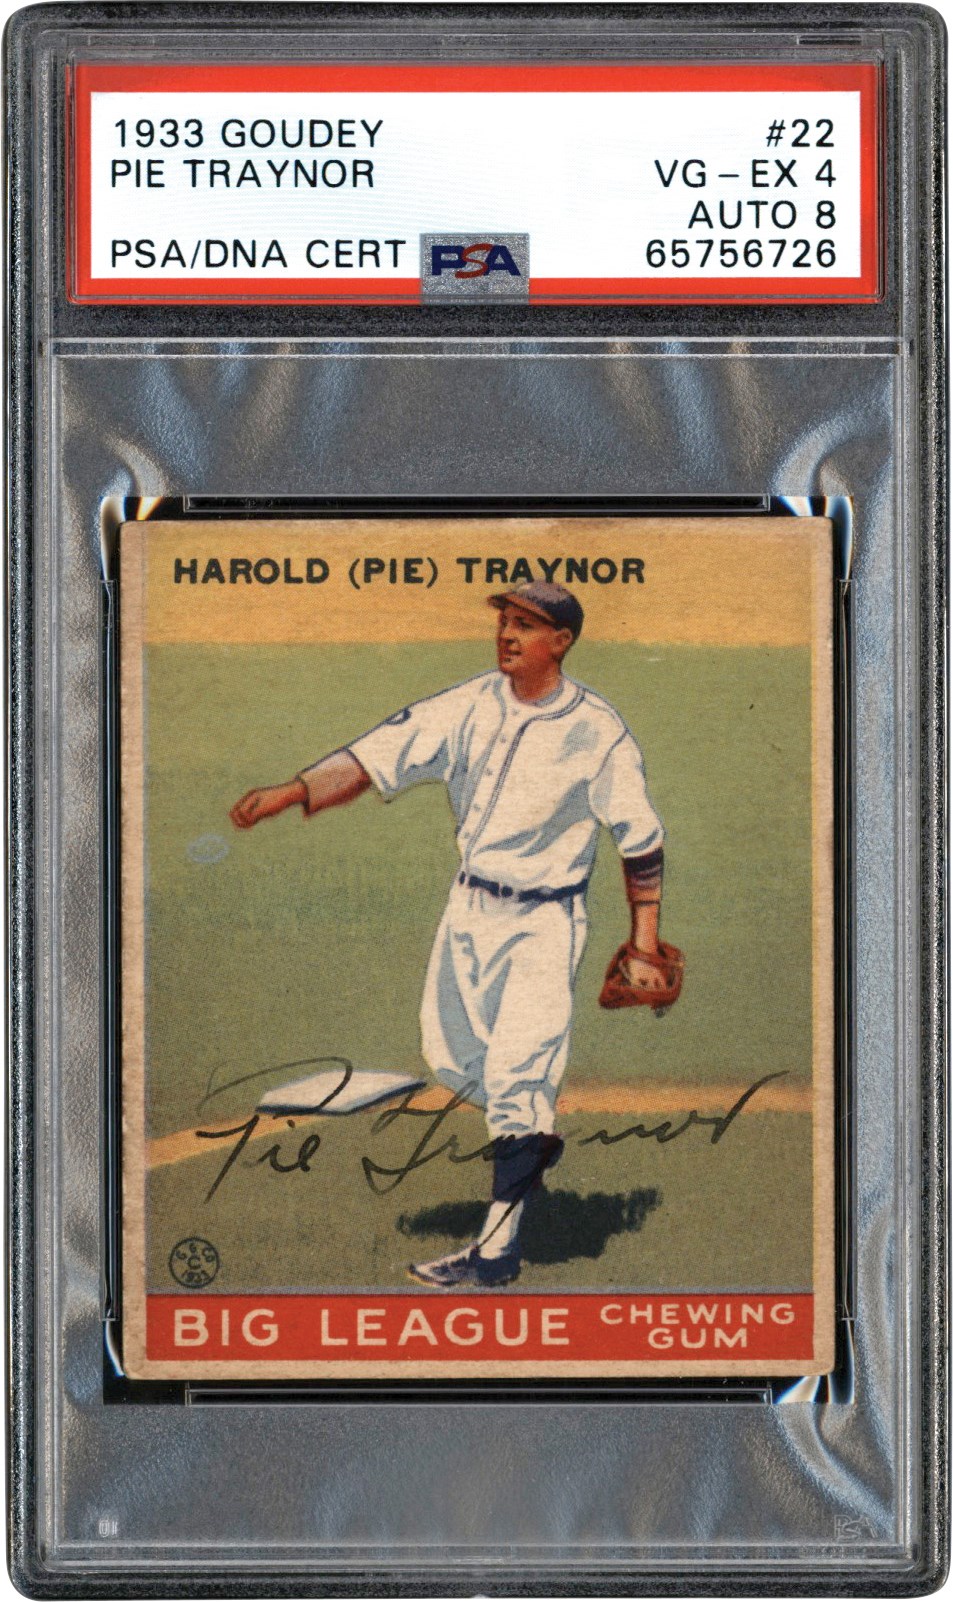 - Signed 1933 Goudey #22 Pie Traynor PSA VG-EX 4 Auto 8 (Pop 1 of 1 - Highest Graded)